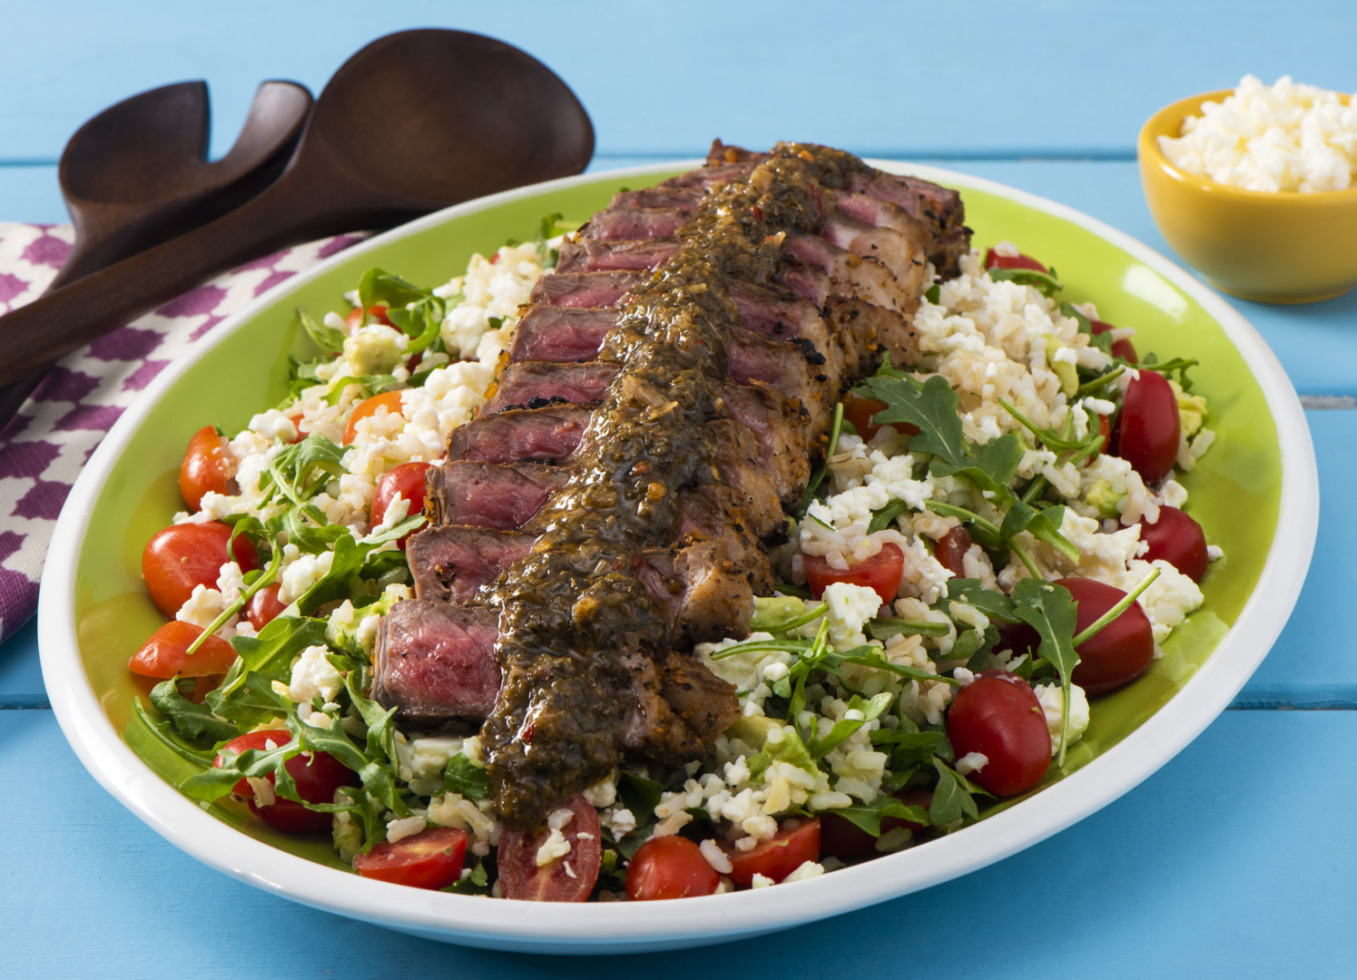 Grilled Steak and Brown Rice Salad Platter